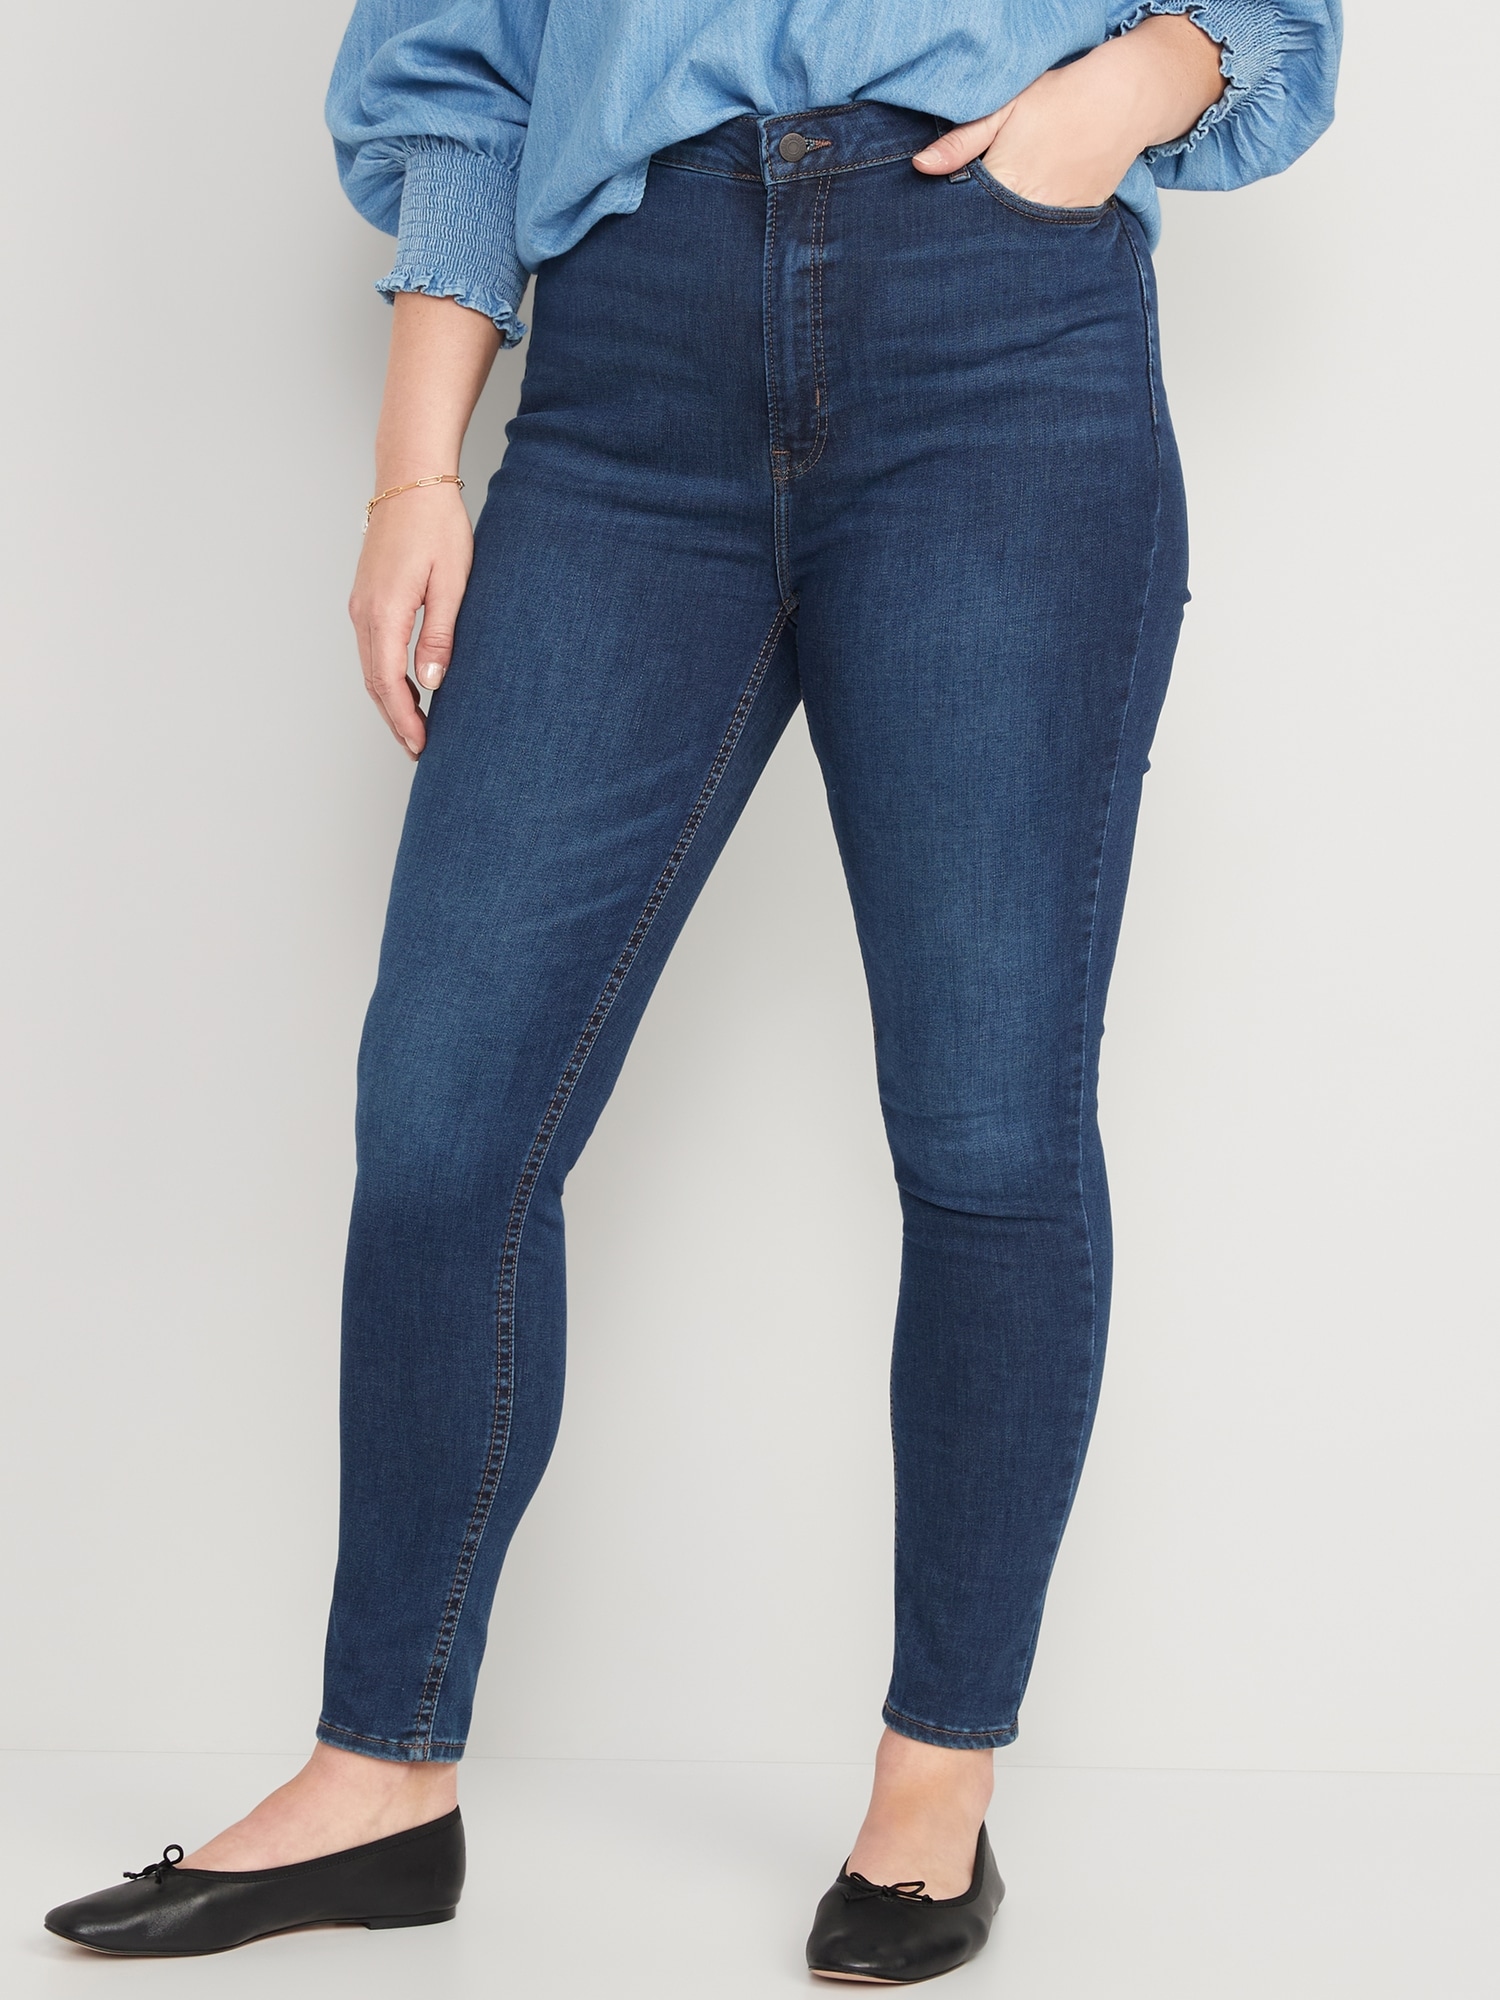 old navy plus size jeans